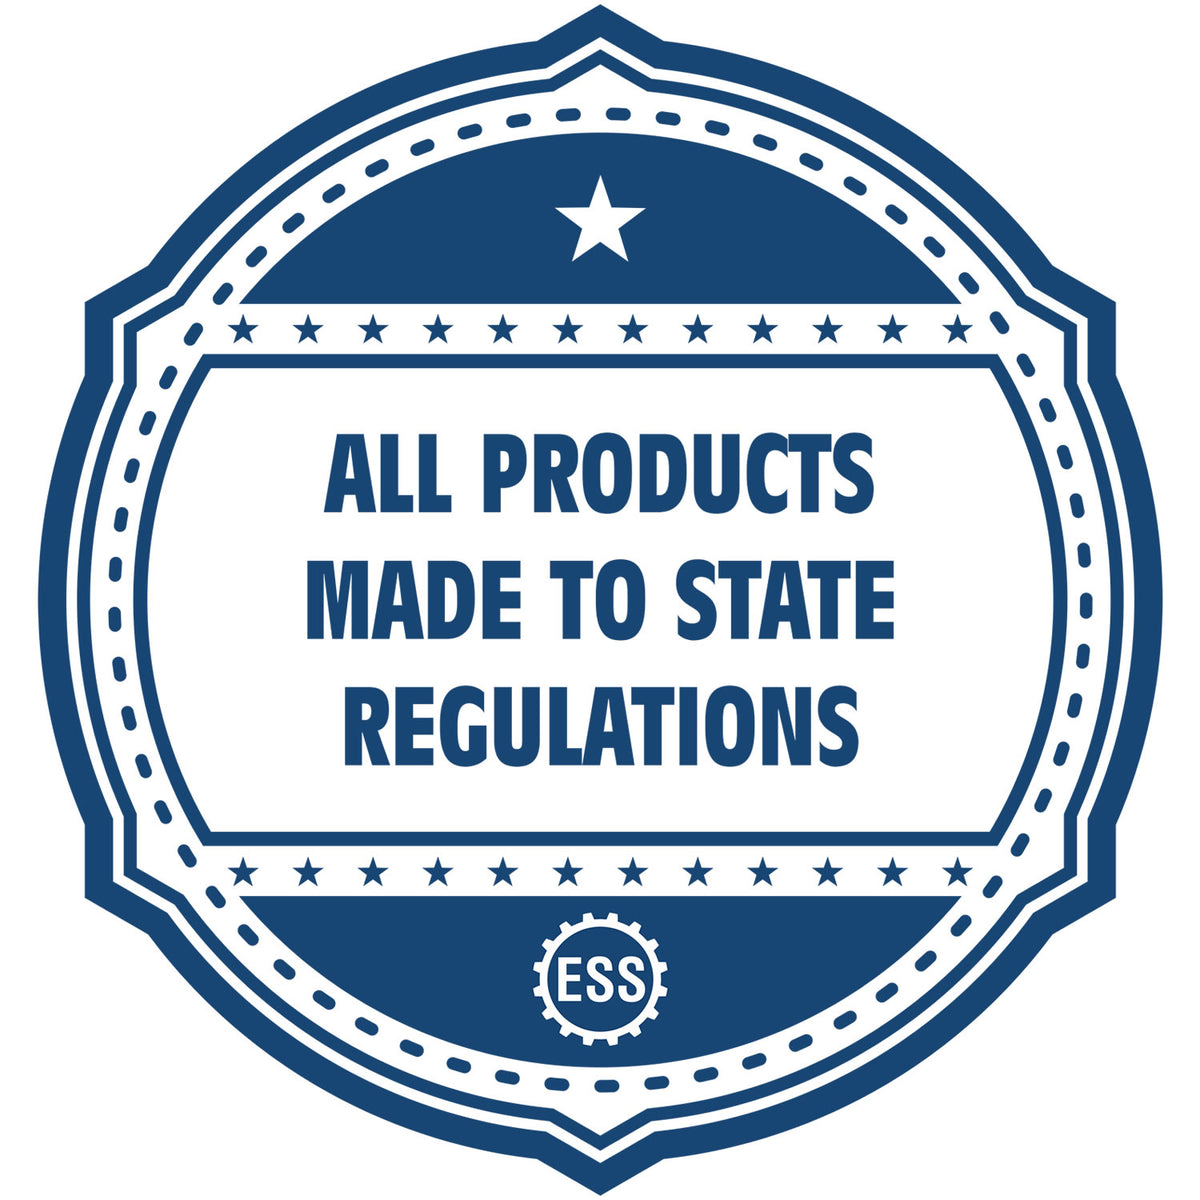 A blue icon or badge for the Hybrid Colorado Architect Seal showing that this product is made in compliance with state regulations.